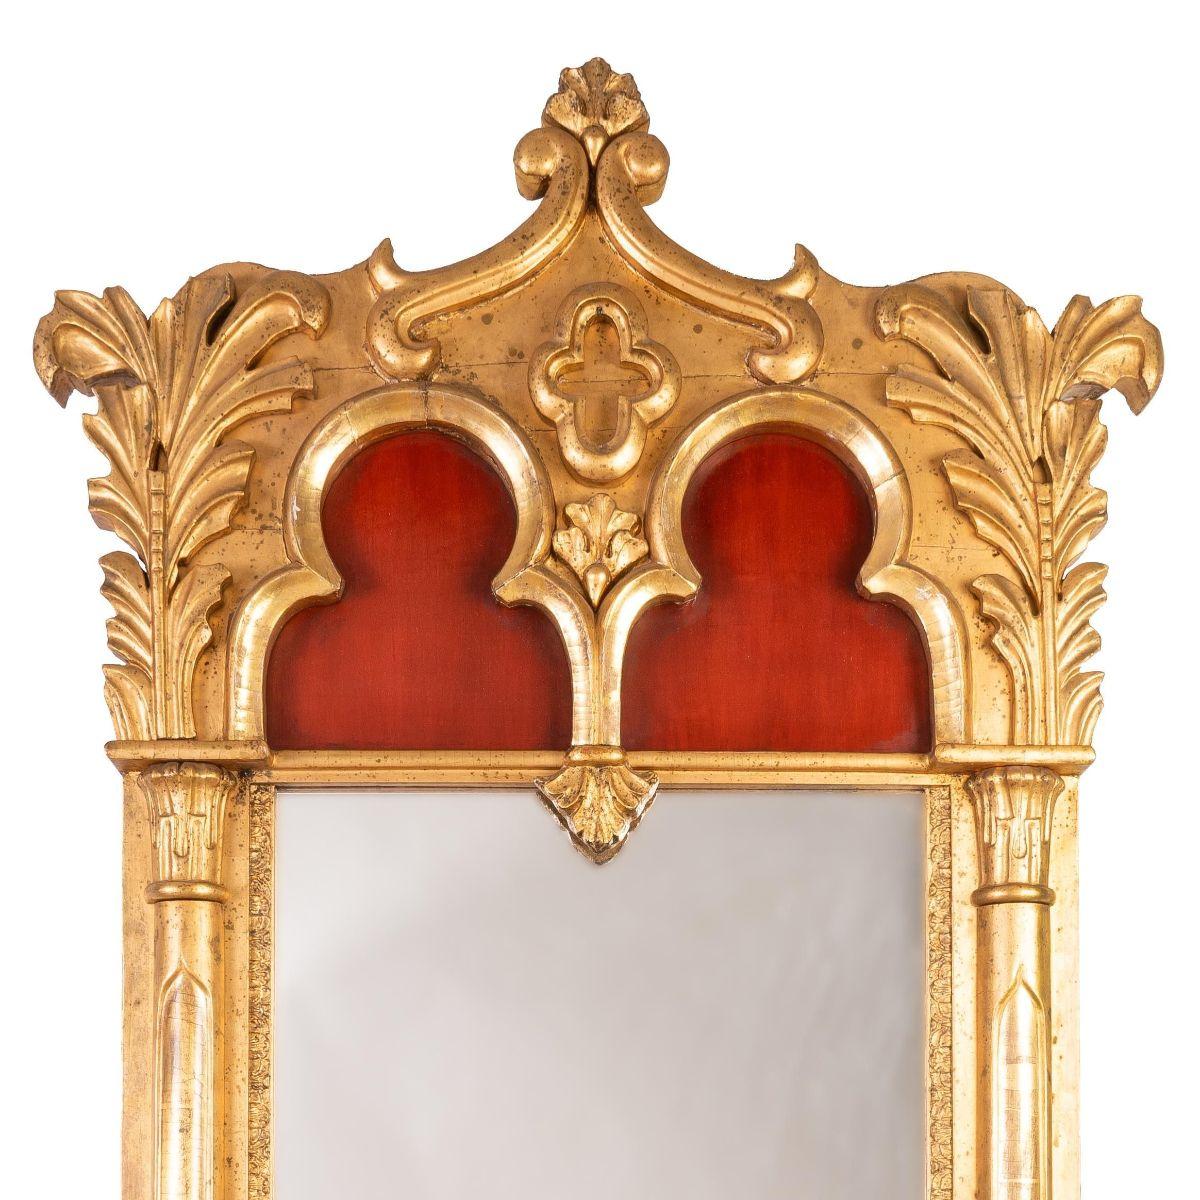 1840's Gothic Revival Gilt Pier Mirror In Good Condition For Sale In Kenilworth, IL